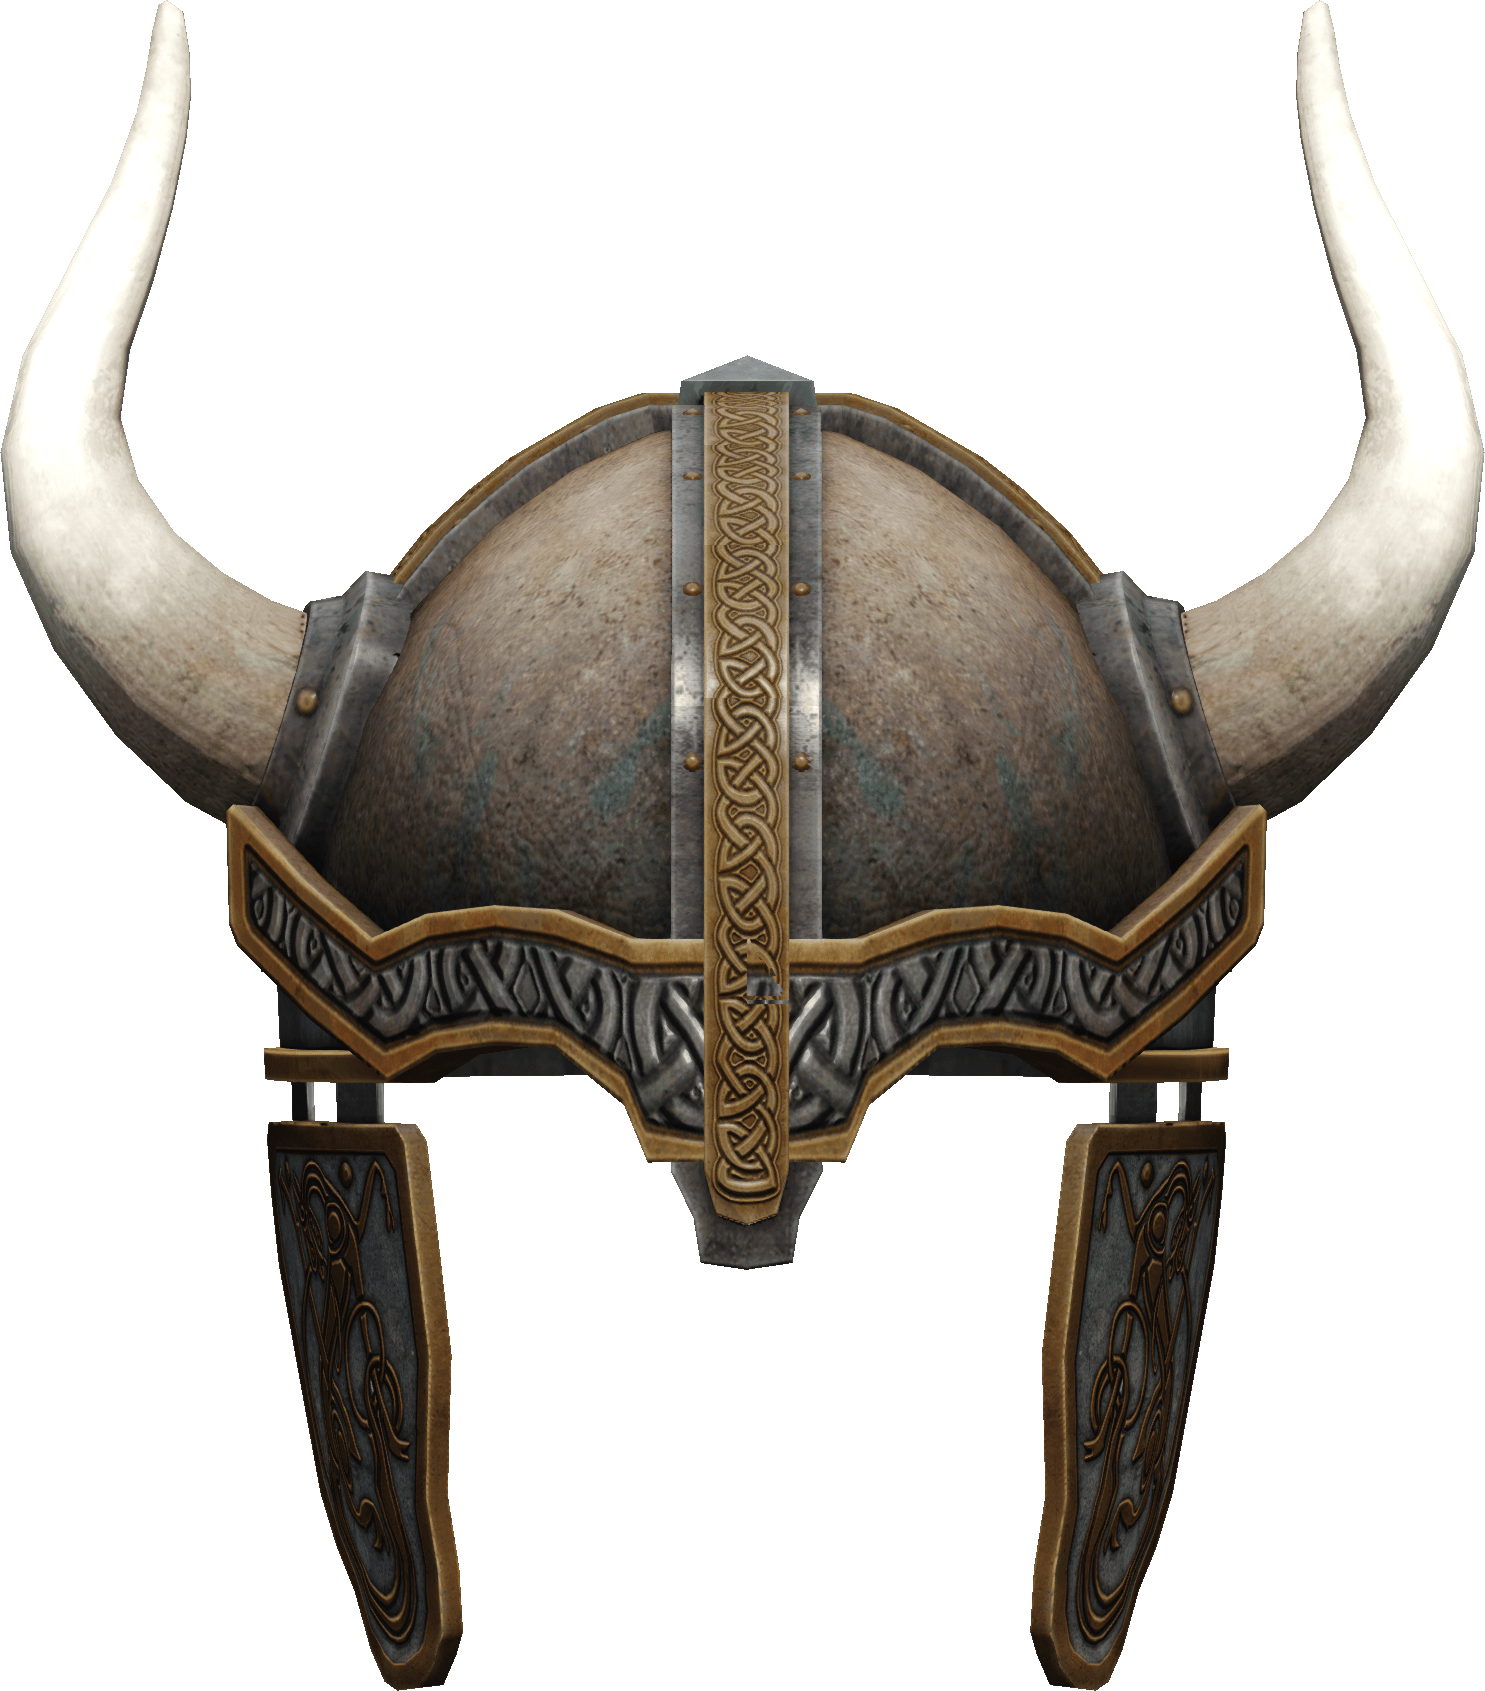 A Helmet With Horns And A Black Background